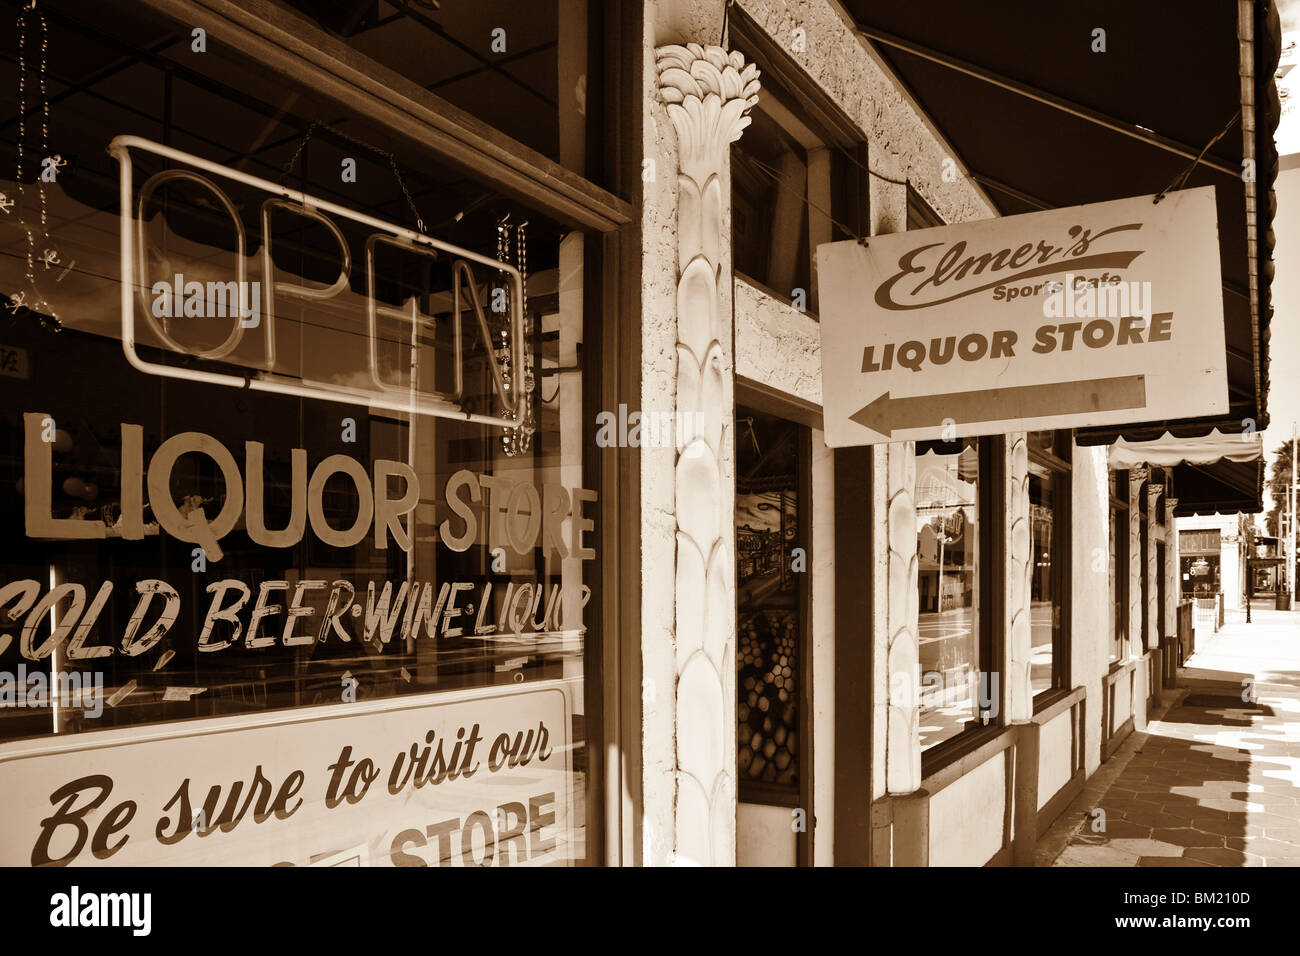 Ybor City, FL - July 2009 - Elmer's Sports Cafe and Liquor Store in the historic district of Ybor City in Tampa, Florida Stock Photo